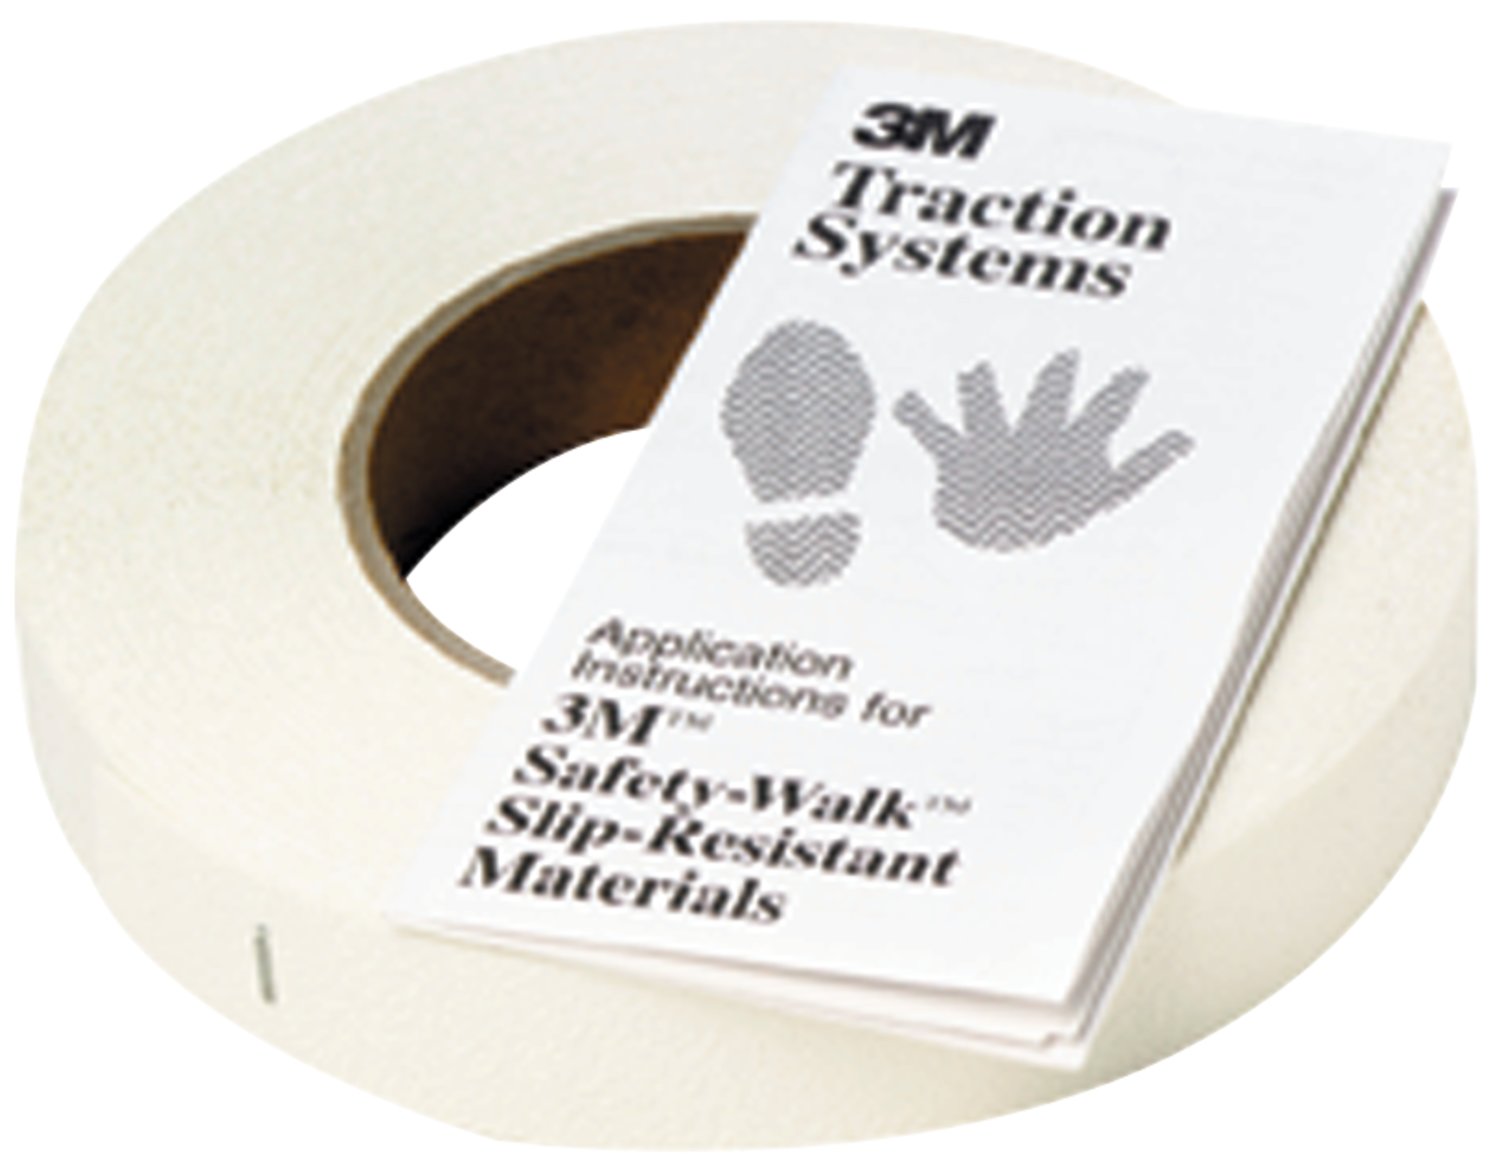 7000029632 - 3M Safety-Walk Slip-Resistant Fine Resilient Tapes & Treads 280,
White, 1 in x 60 ft, 4 Rolls/Case